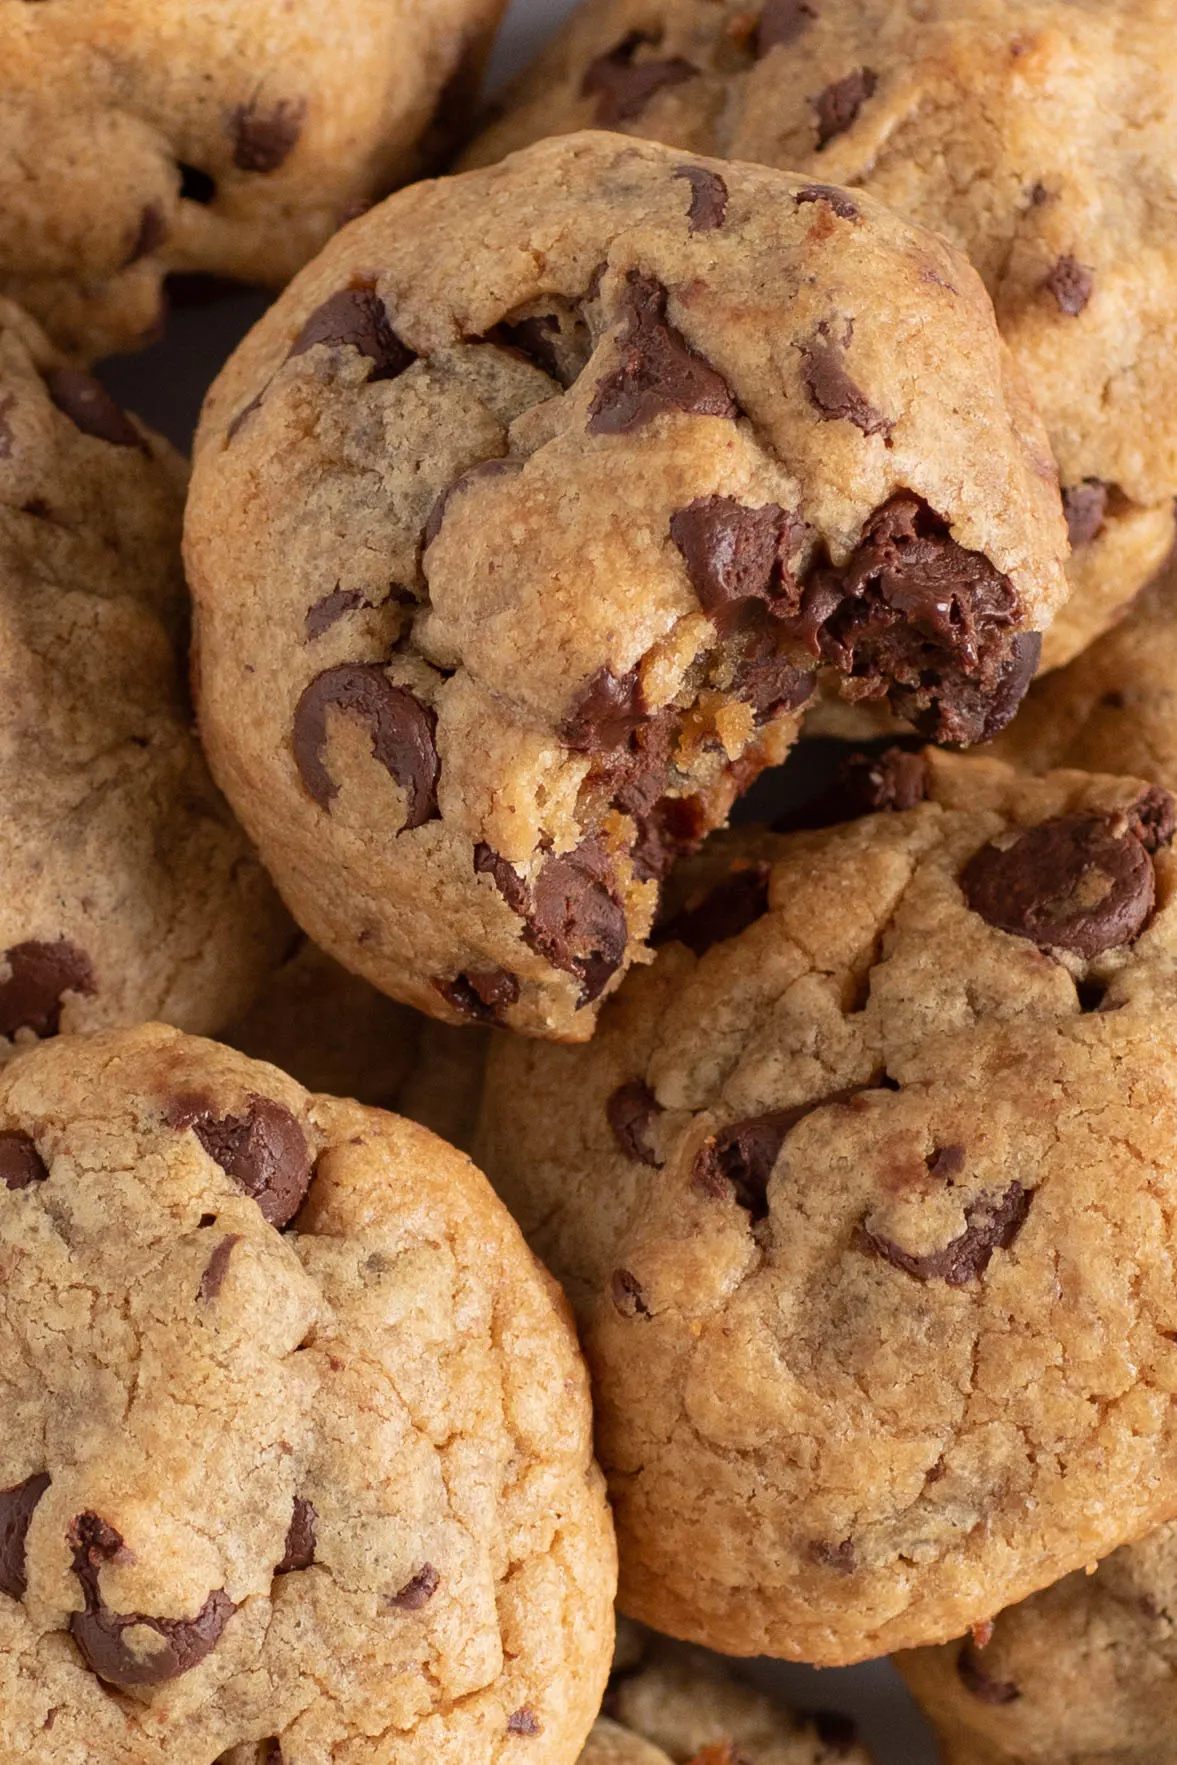 super thick and heavy chocolate chip cookies made with peanut butter loaded onto a plate. one cookie has a big bite taken out of it revealing loads of chocolate chips baked inside.